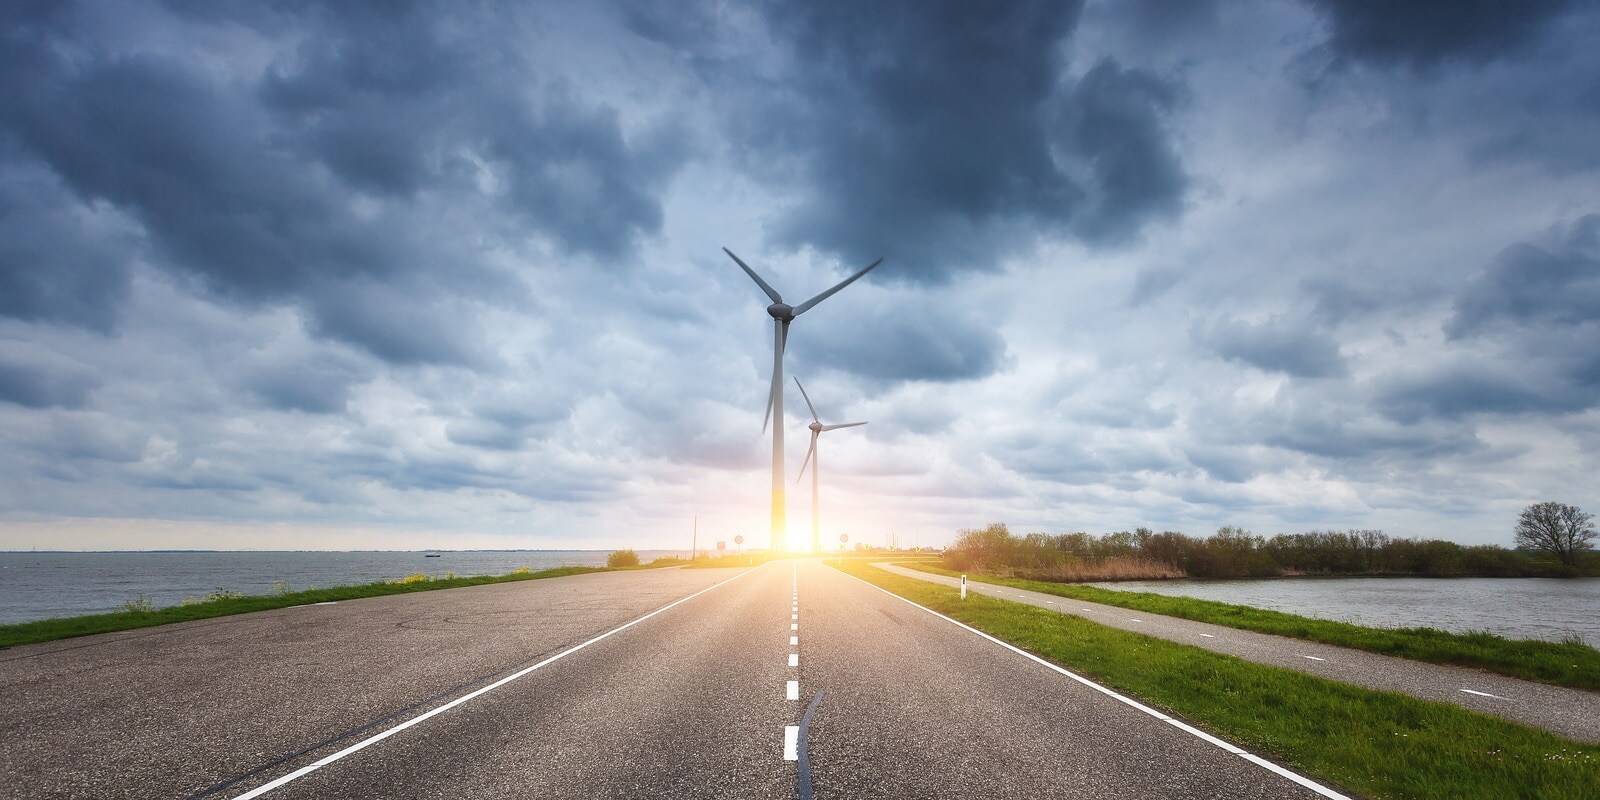 Beautiful asphalt road with wind turbines generating electricity at sunset. Windmills for electric power production. Landscape with road, green grass and wind mills and blue cloudy sky in spring